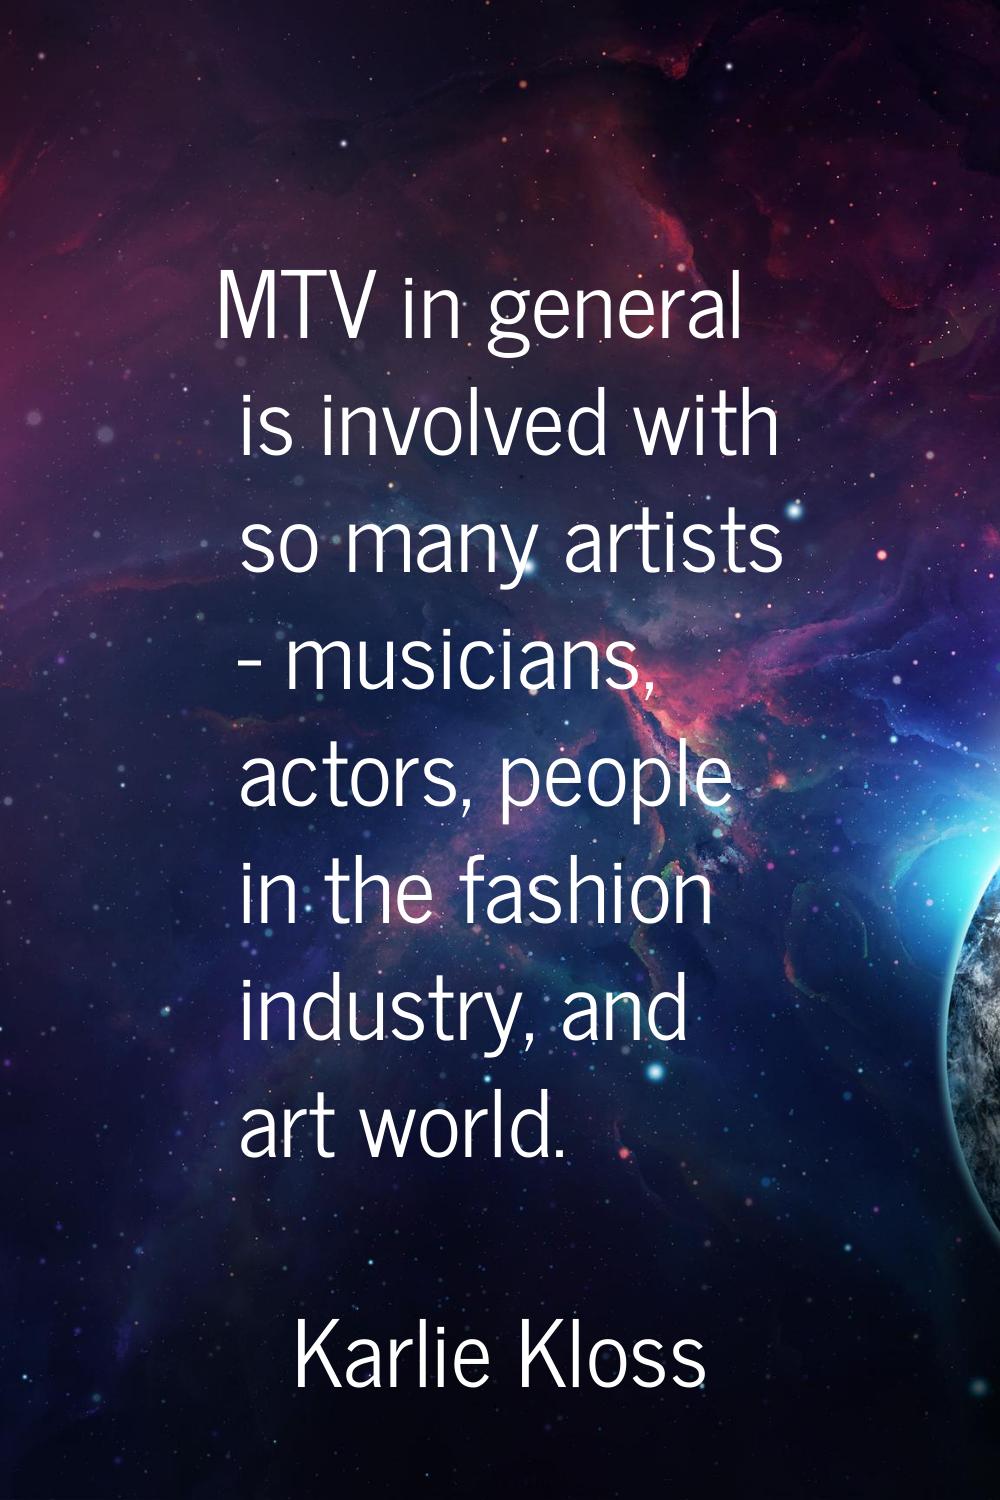 MTV in general is involved with so many artists - musicians, actors, people in the fashion industry